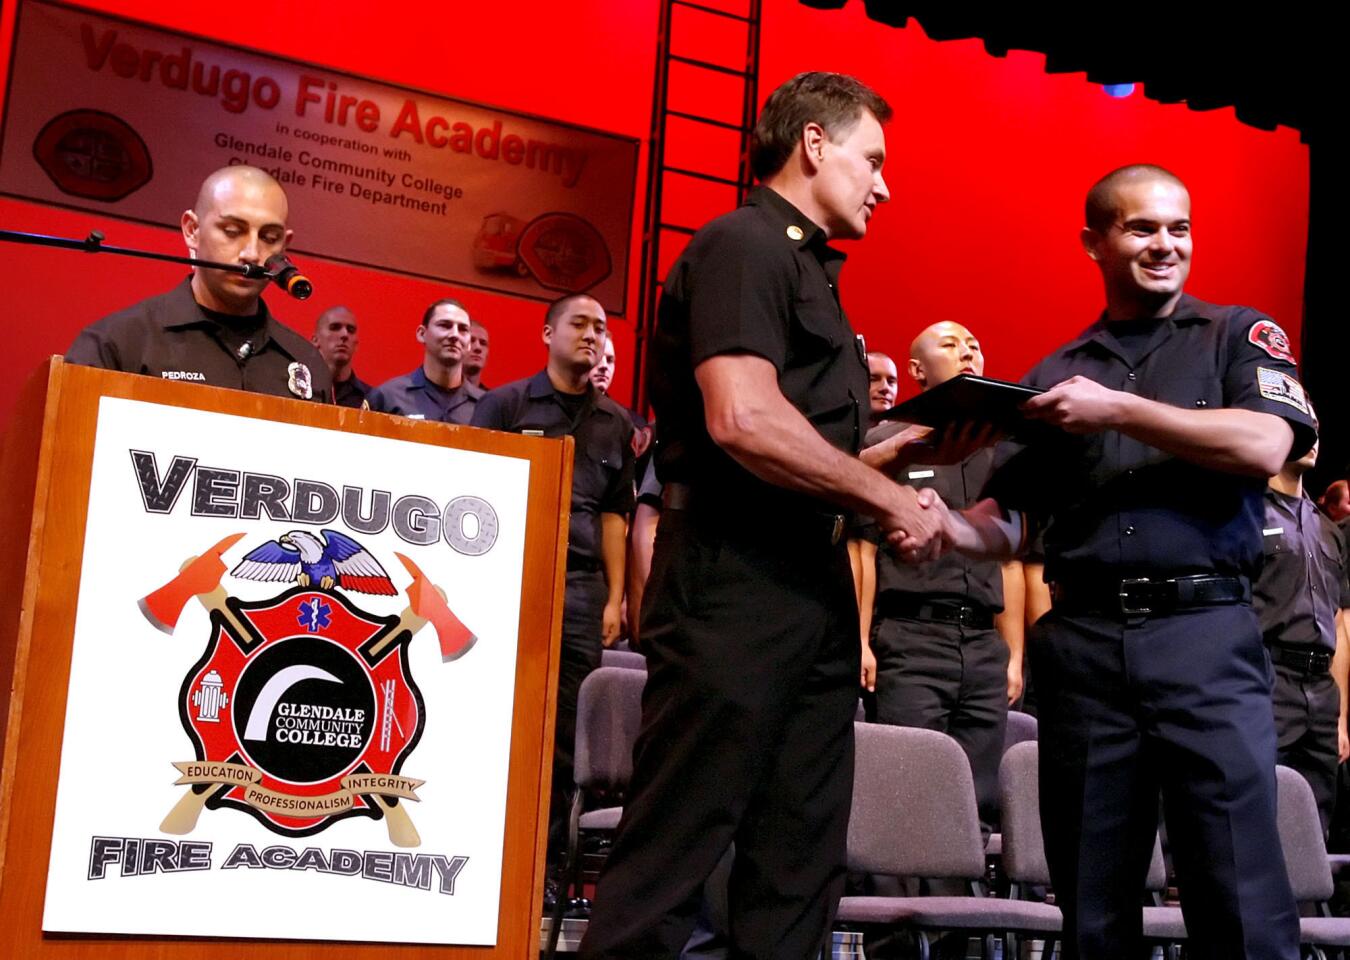 Glendale firefighter and fire academy instructor Gilbert Pedroza, left, calls out graduate names as Cadet Brian Rich, right, gets his graduation certificate from chief Sam DiGiovanna, center, at the Verdugo Fire Academy Graduation Ceremony for Class XIV at Glendale College on Saturday, January 7, 2012. Forty-five cadets graduated.